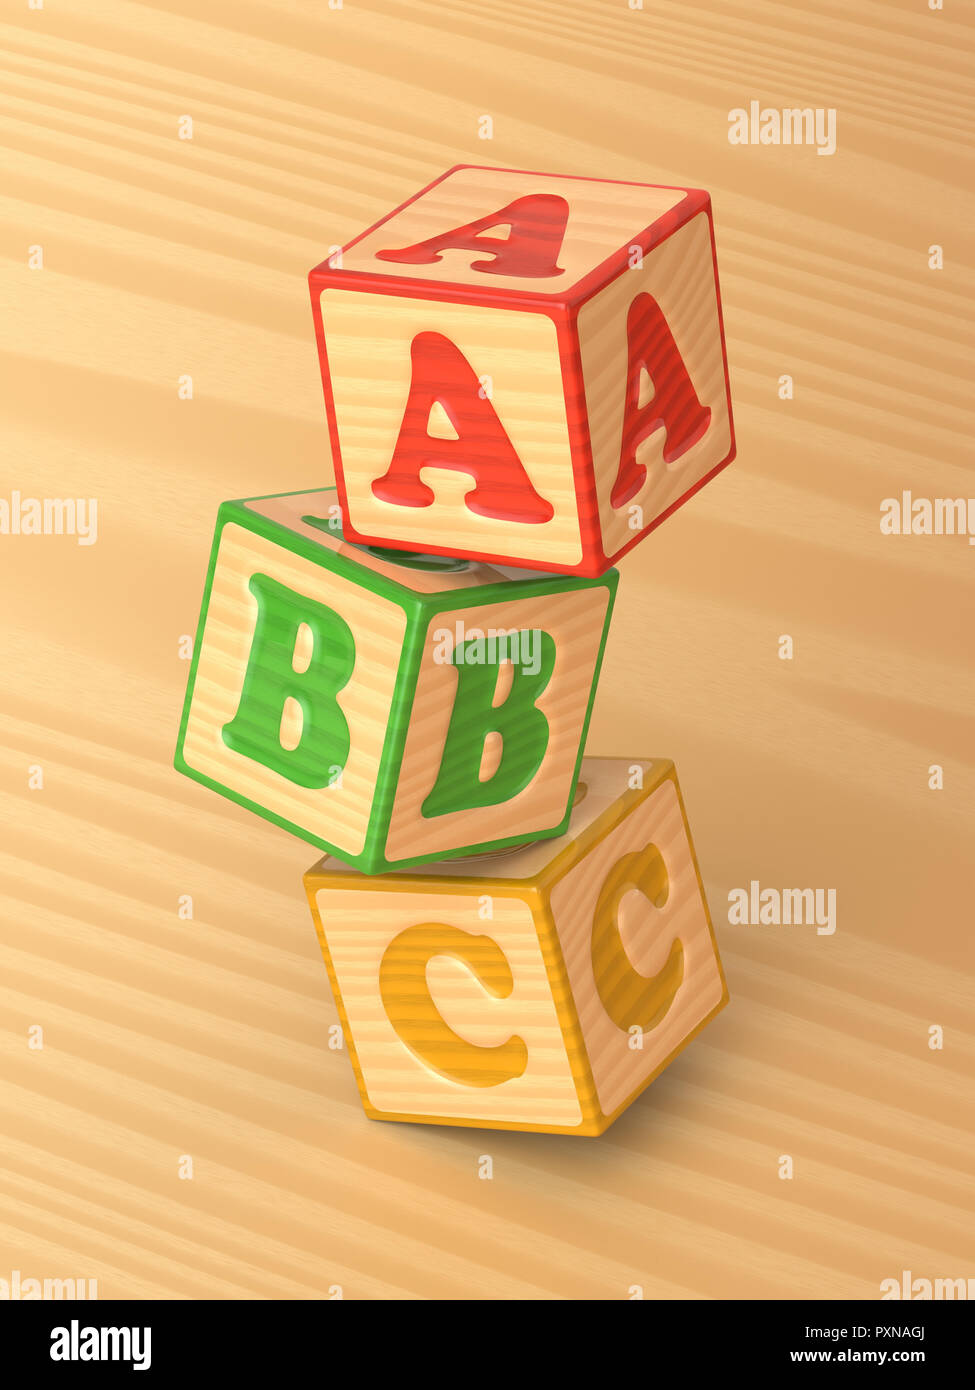 3d rendered angled view of tumbling red, green and yellow wooden toy alphabet blocks on a light wood background. Stock Photo